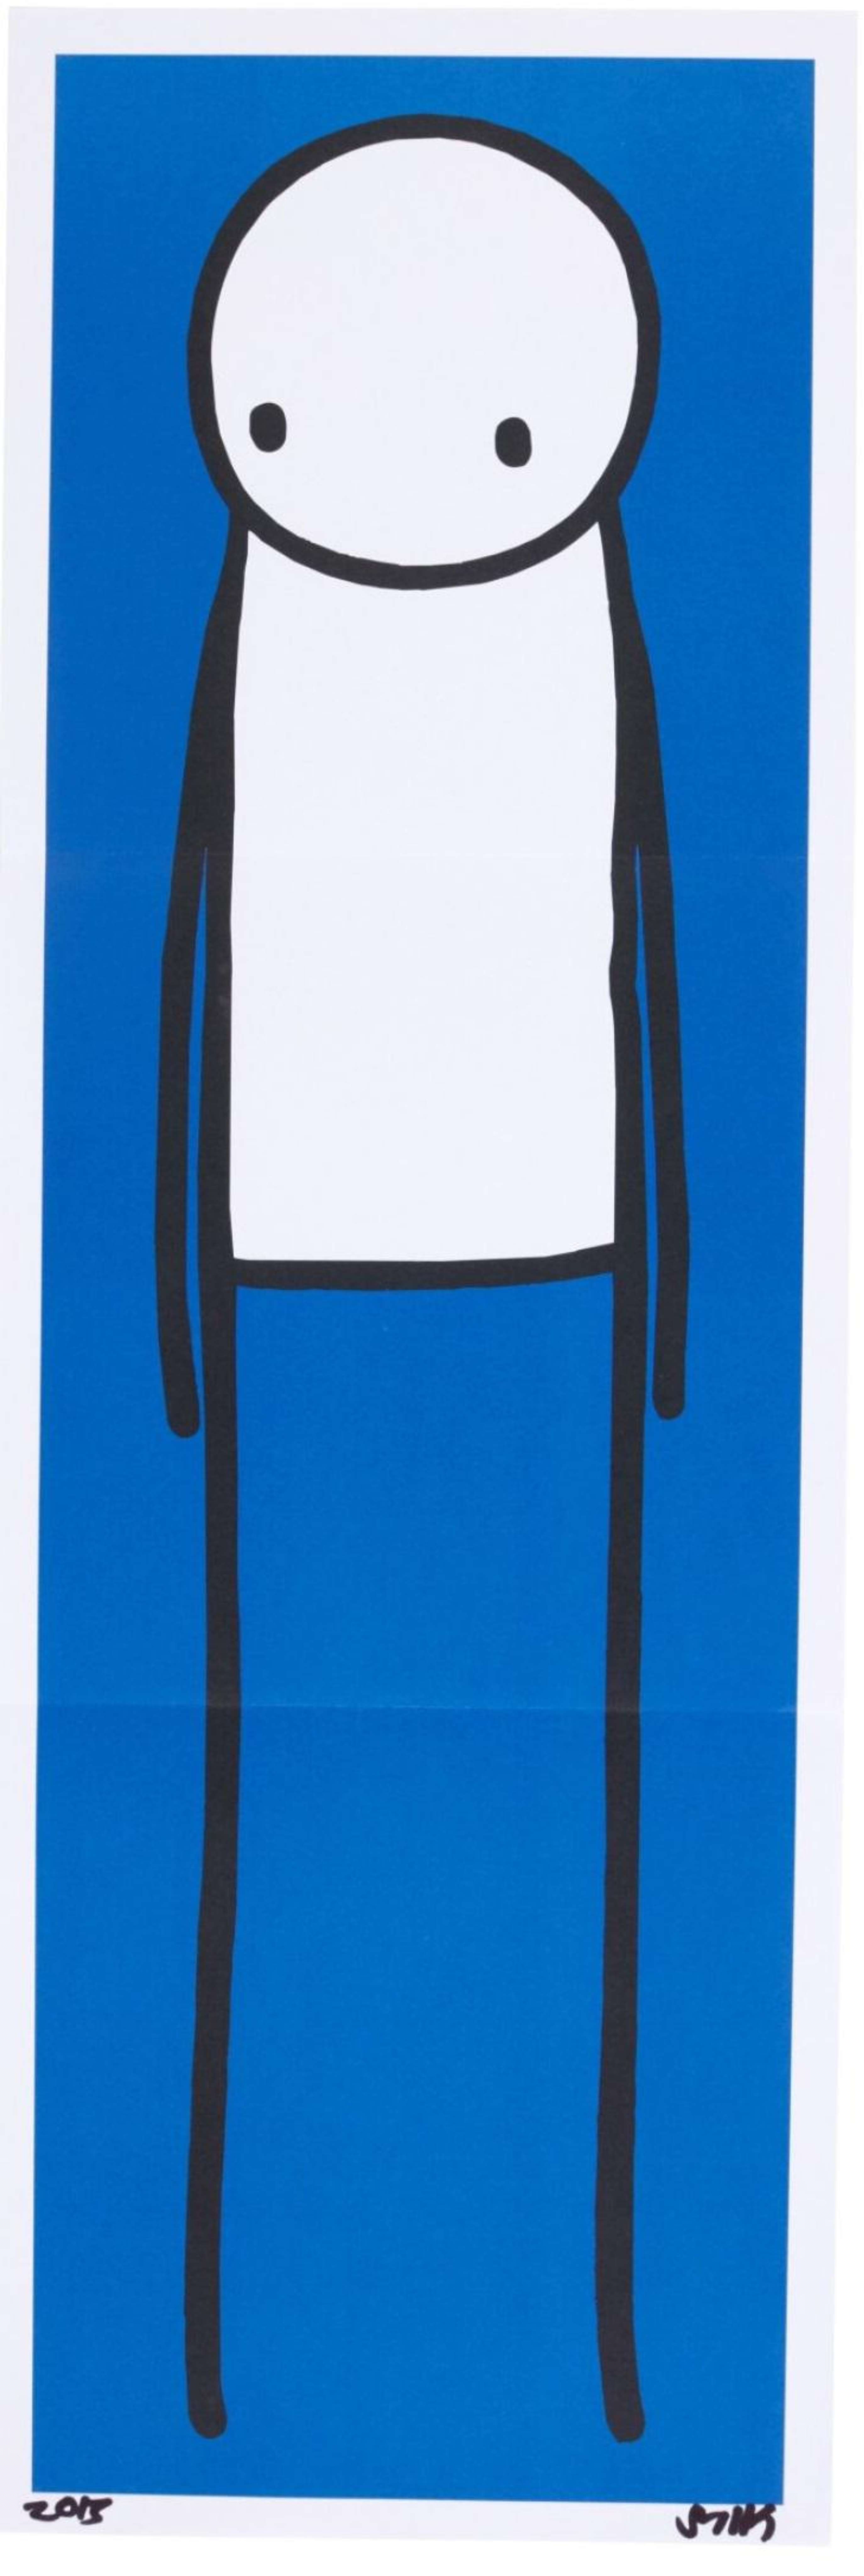 The Big Issue (blue) - Signed Print